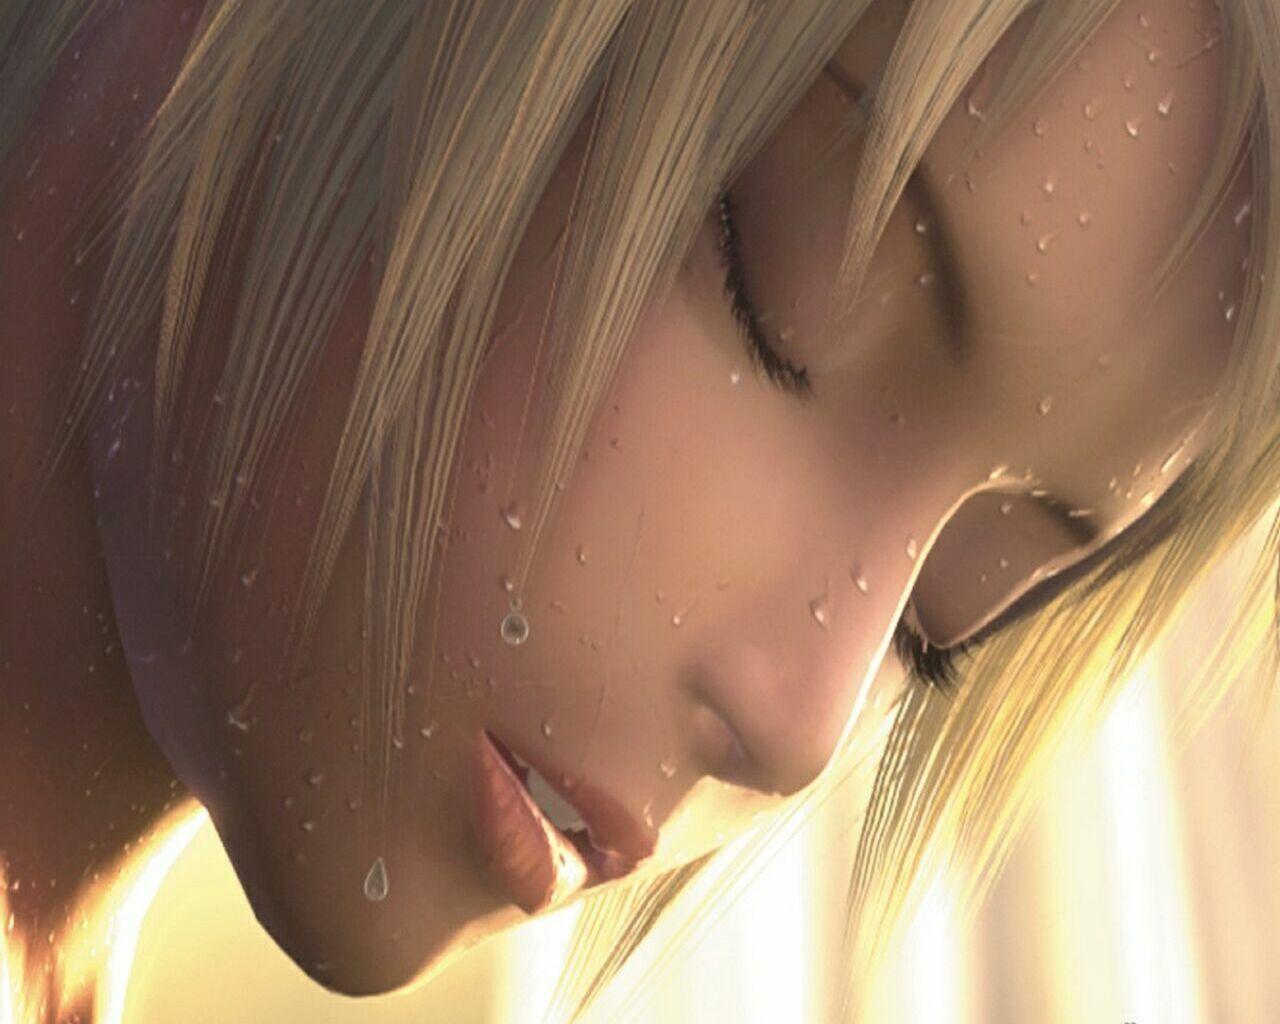 Parasite Eve 3 wallpaper by Samantha80 - Download on ZEDGE™